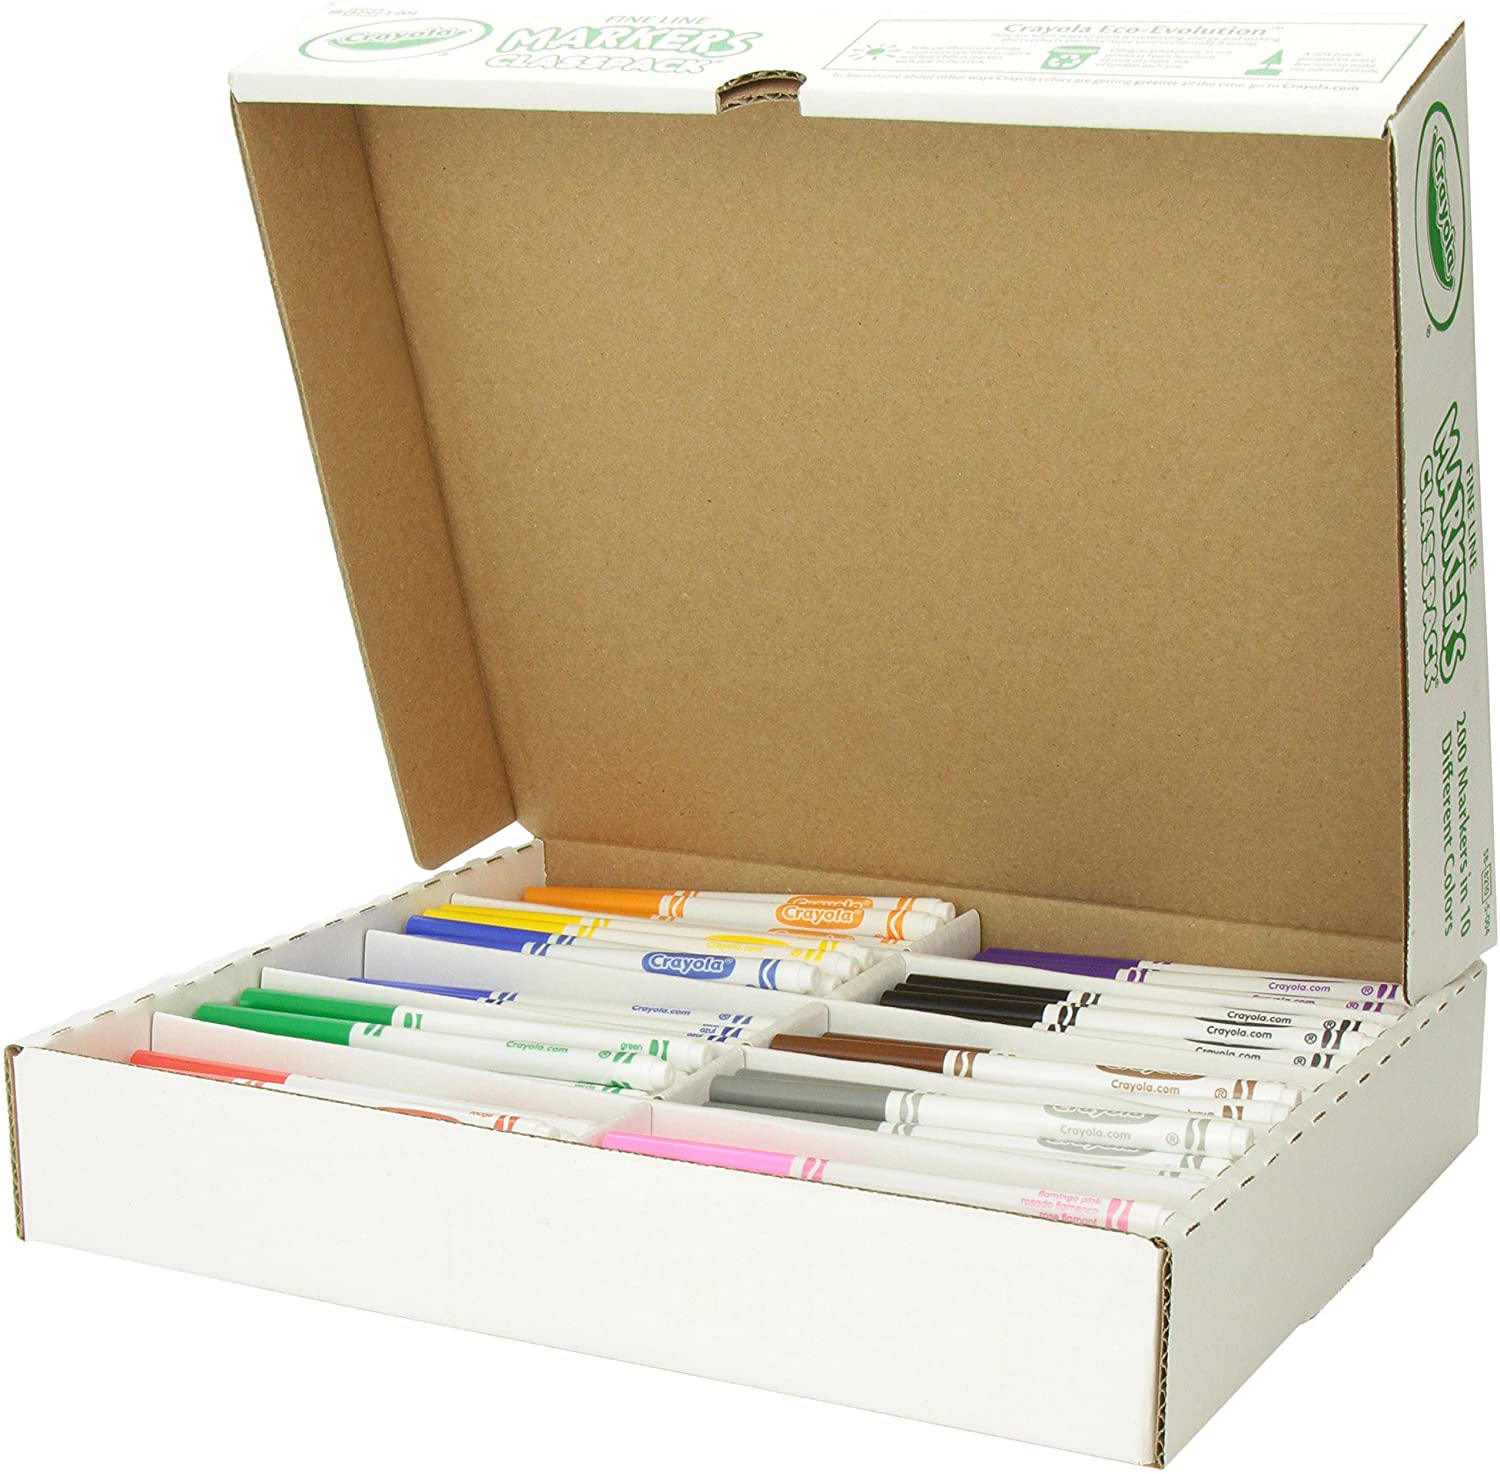 Crayola Fine Line Markers Assorted Classic Classpack Box Of 200